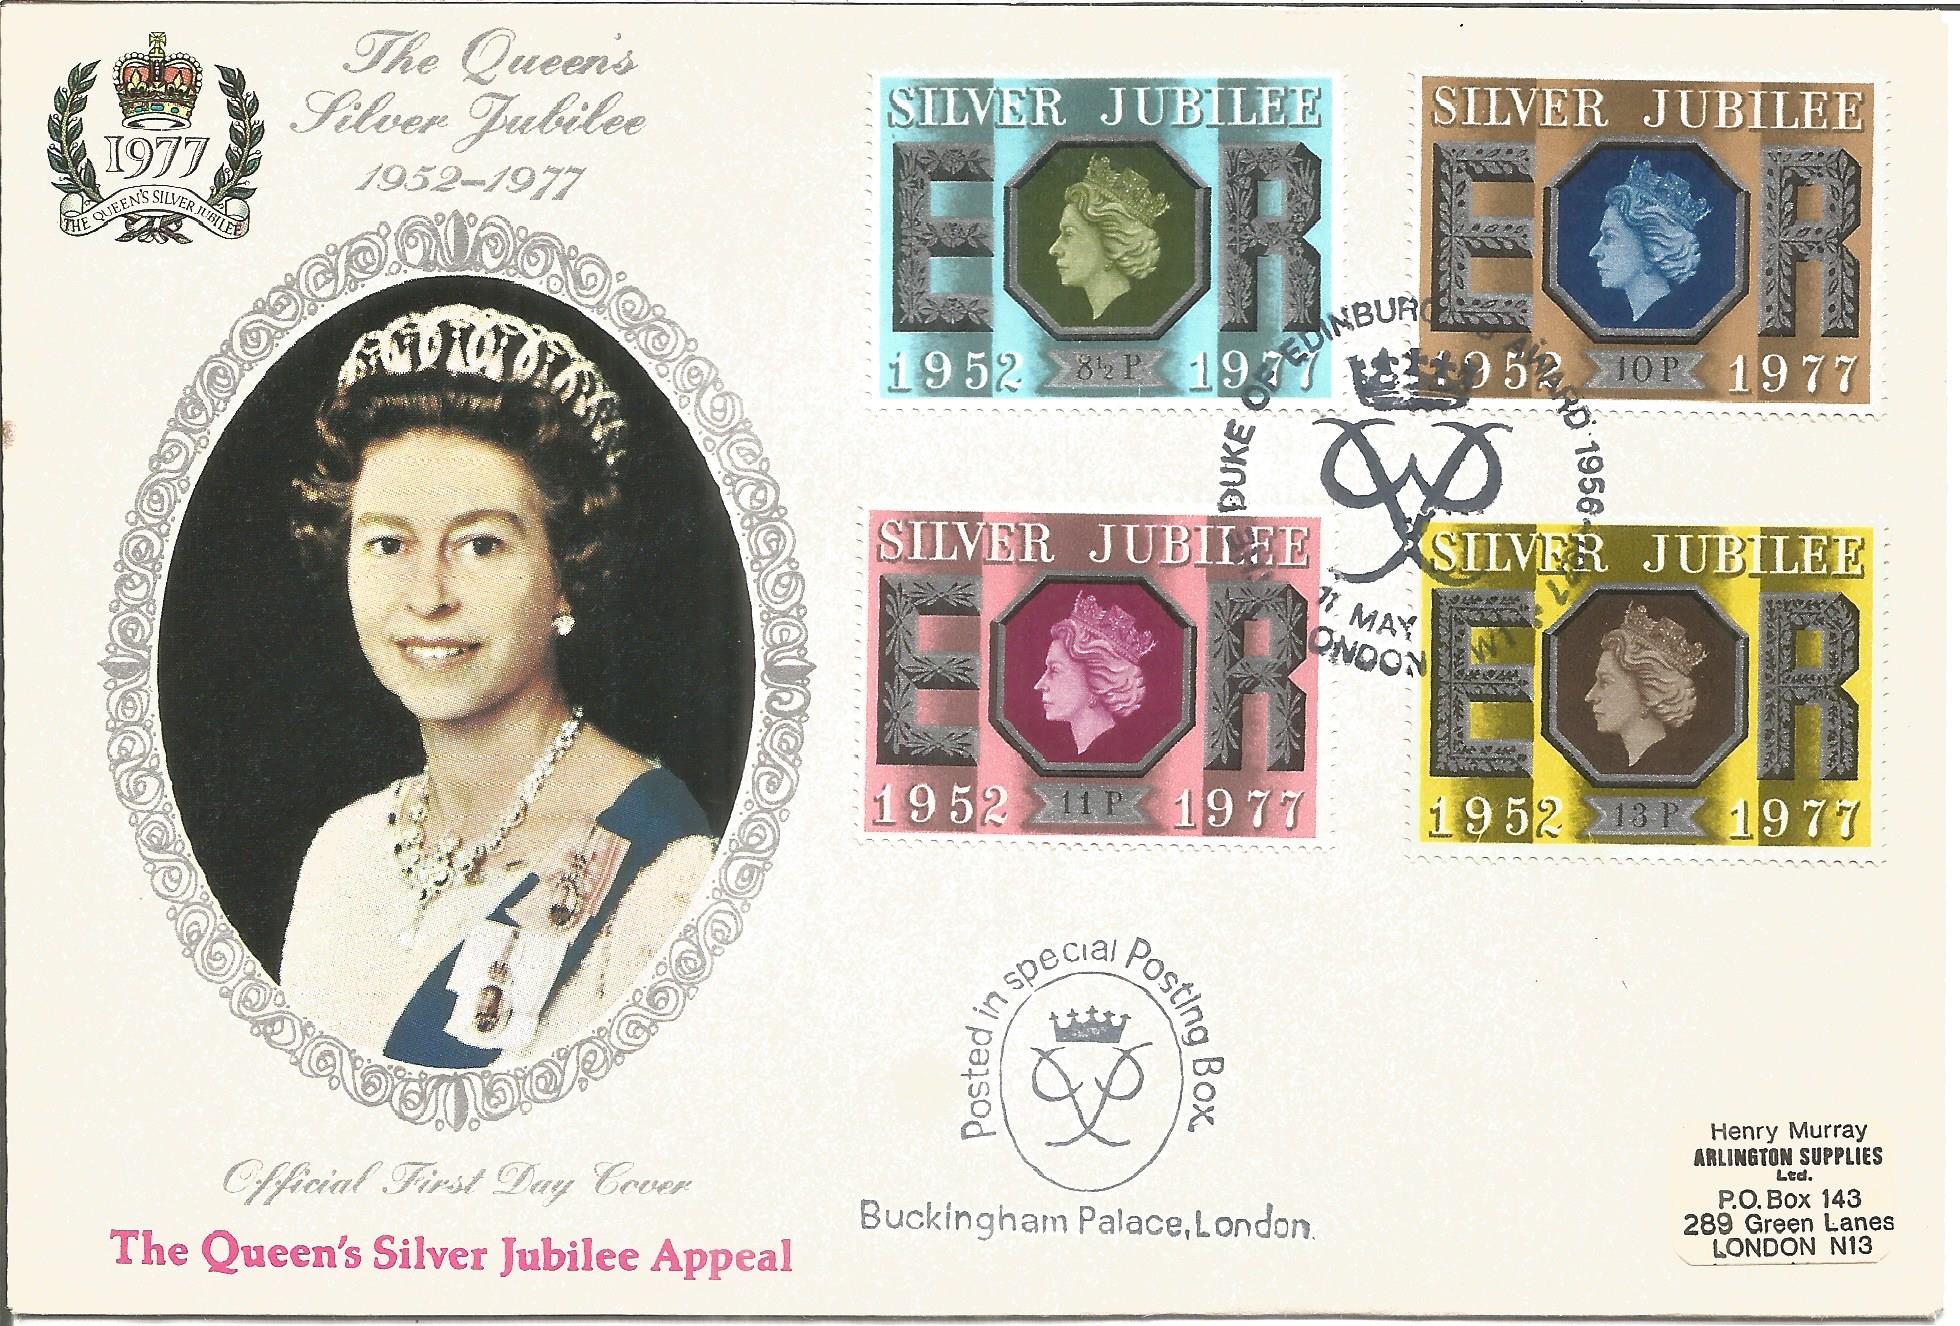 The Queens Silver Jubilee 1952 - 1977 unsigned FDC The Queens Silver Jubilee Appeal. Date stamp